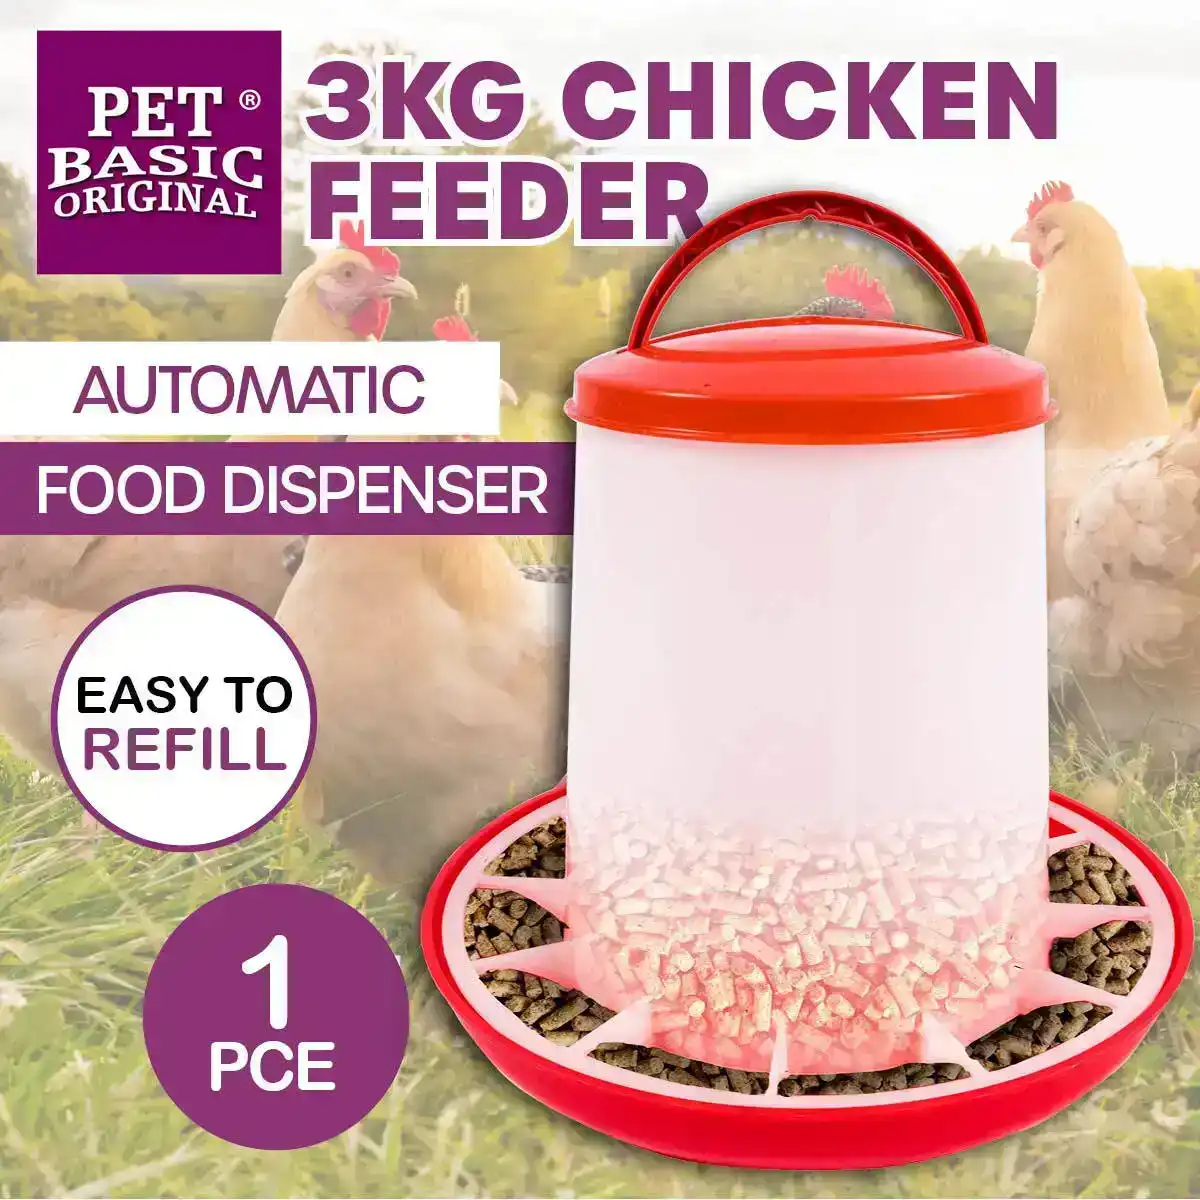 Pet Basic® Chicken Feeder 3KG Large Automatic Easy Refill Carry Handle 27x26CM